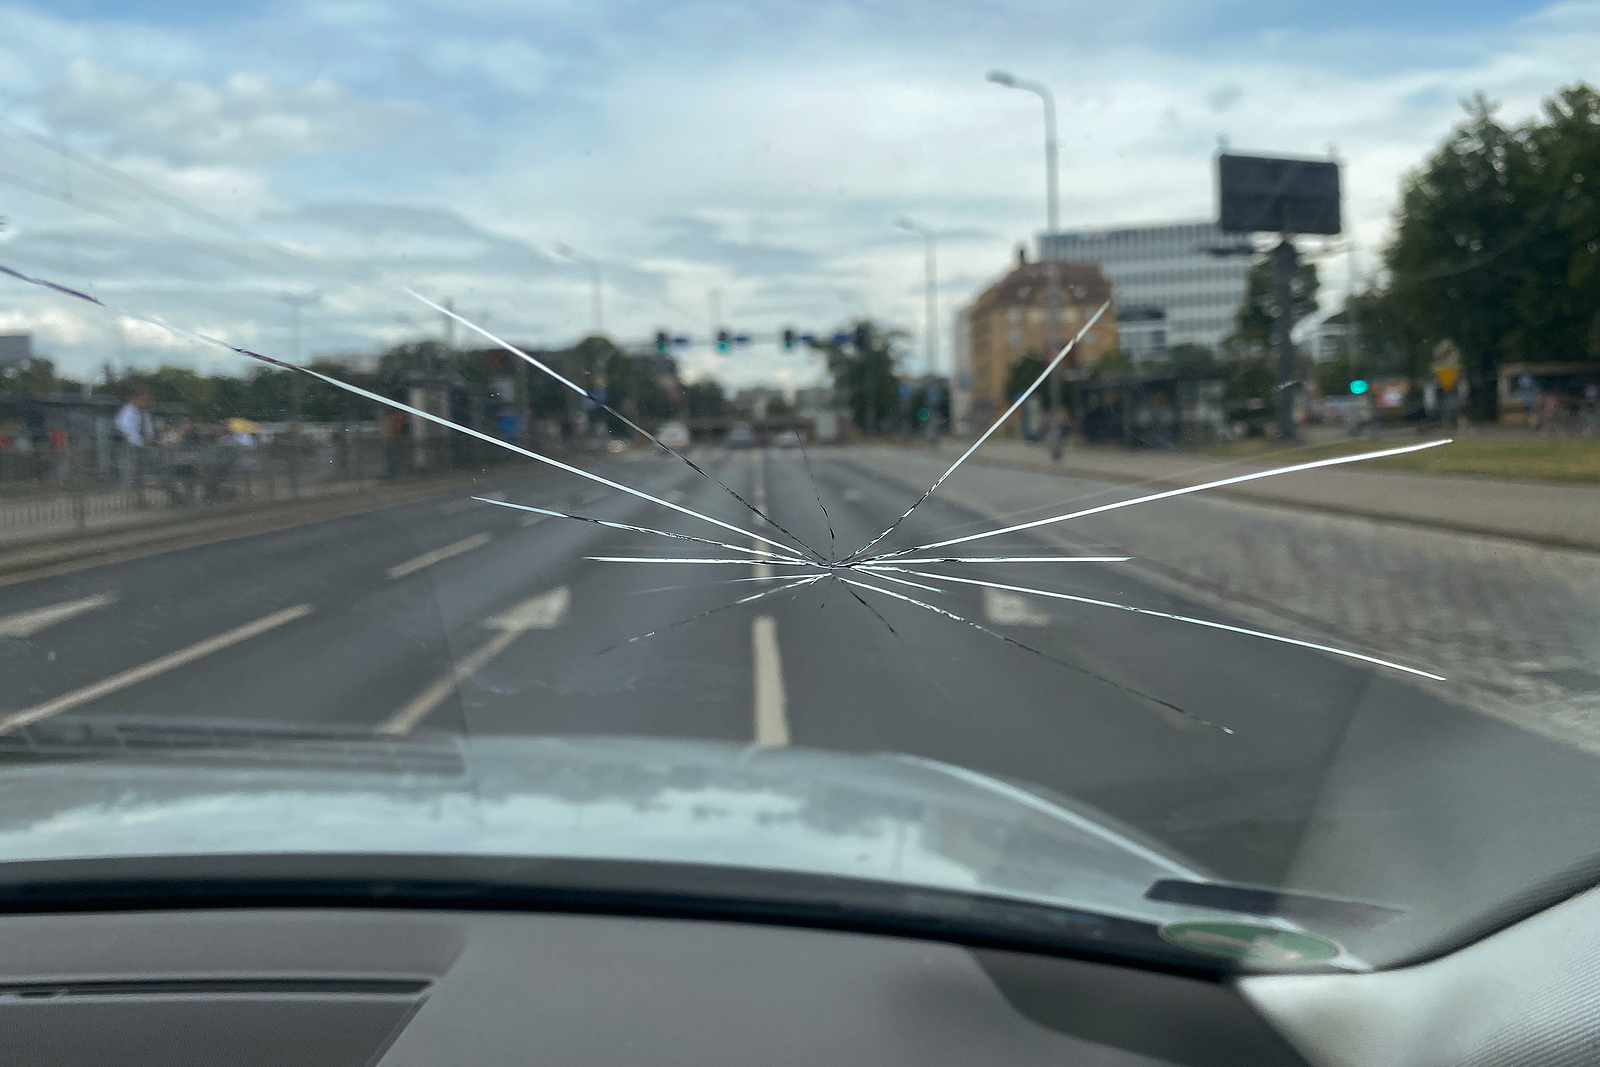 Could Windscreen Cracks Be Caused By Poor Road Maintenance?